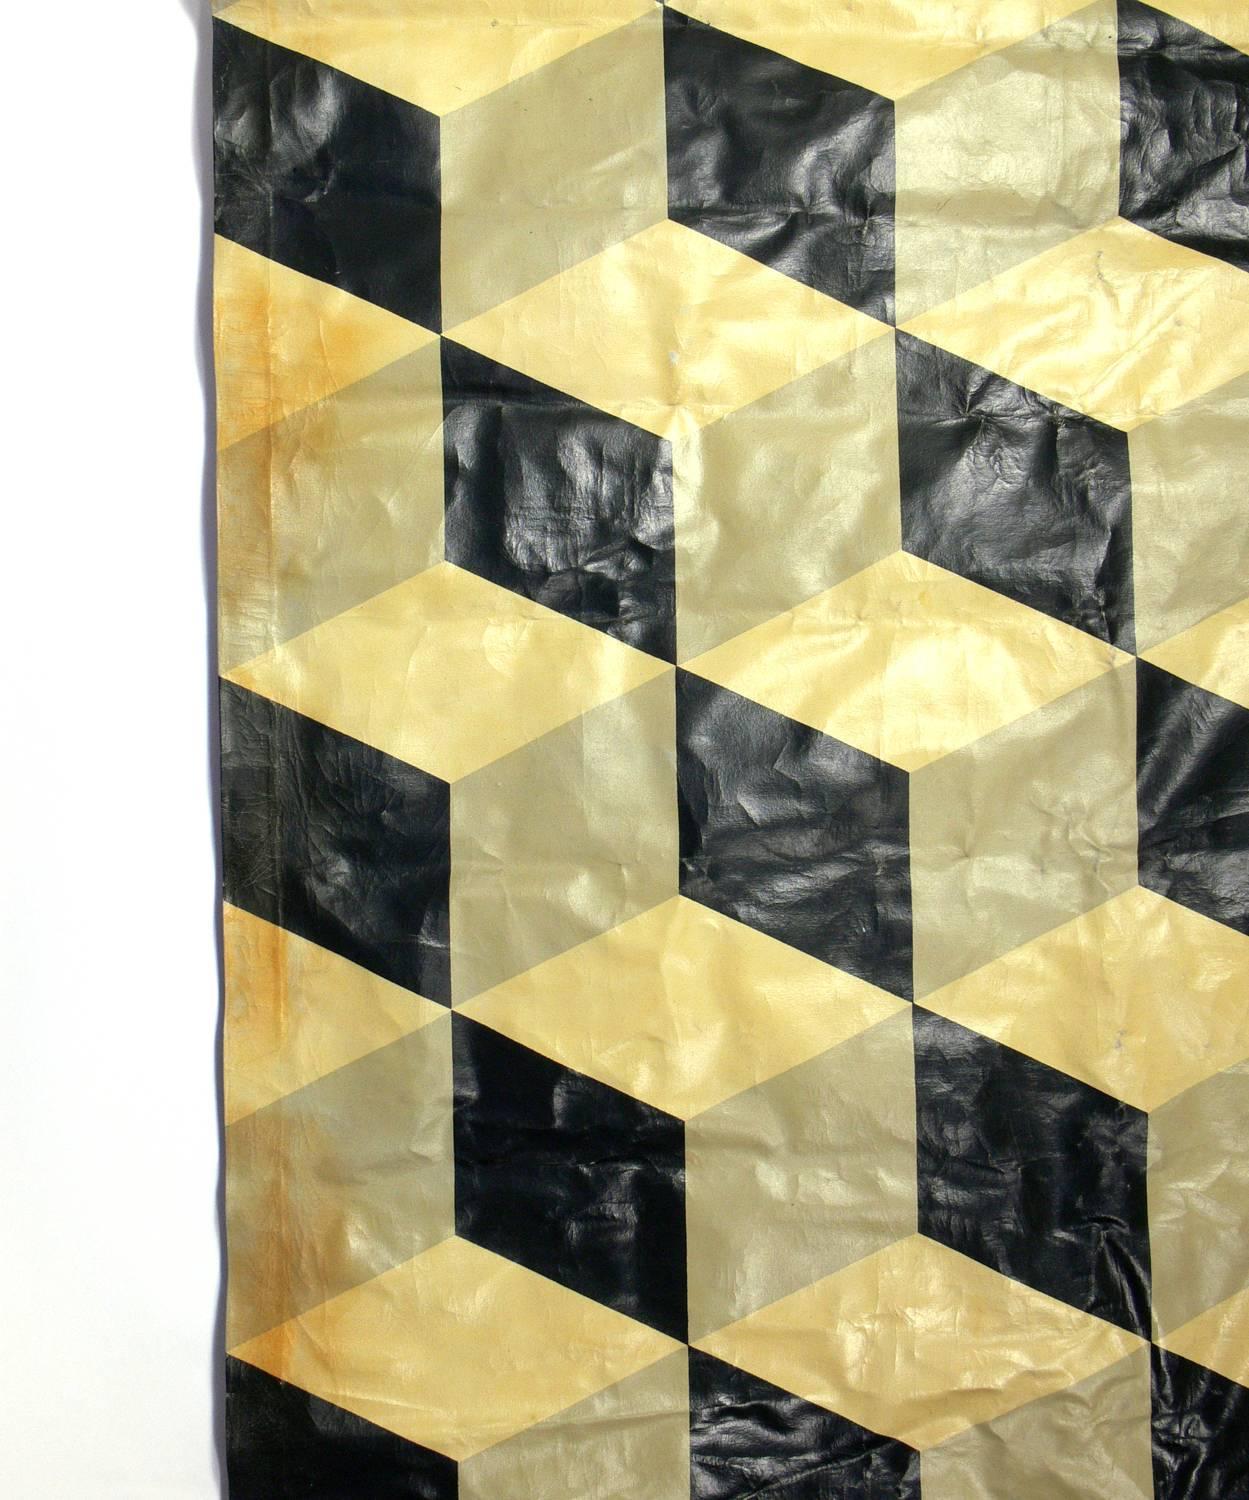 Large-scale geometric painted floor canvas, American, circa 1960s. This piece works great as it's original purpose, a painted floor canvas or carpet, or looks great mounted on a wall. It has a large-scale impact measuring approx 9.5 feet x 8 feet.